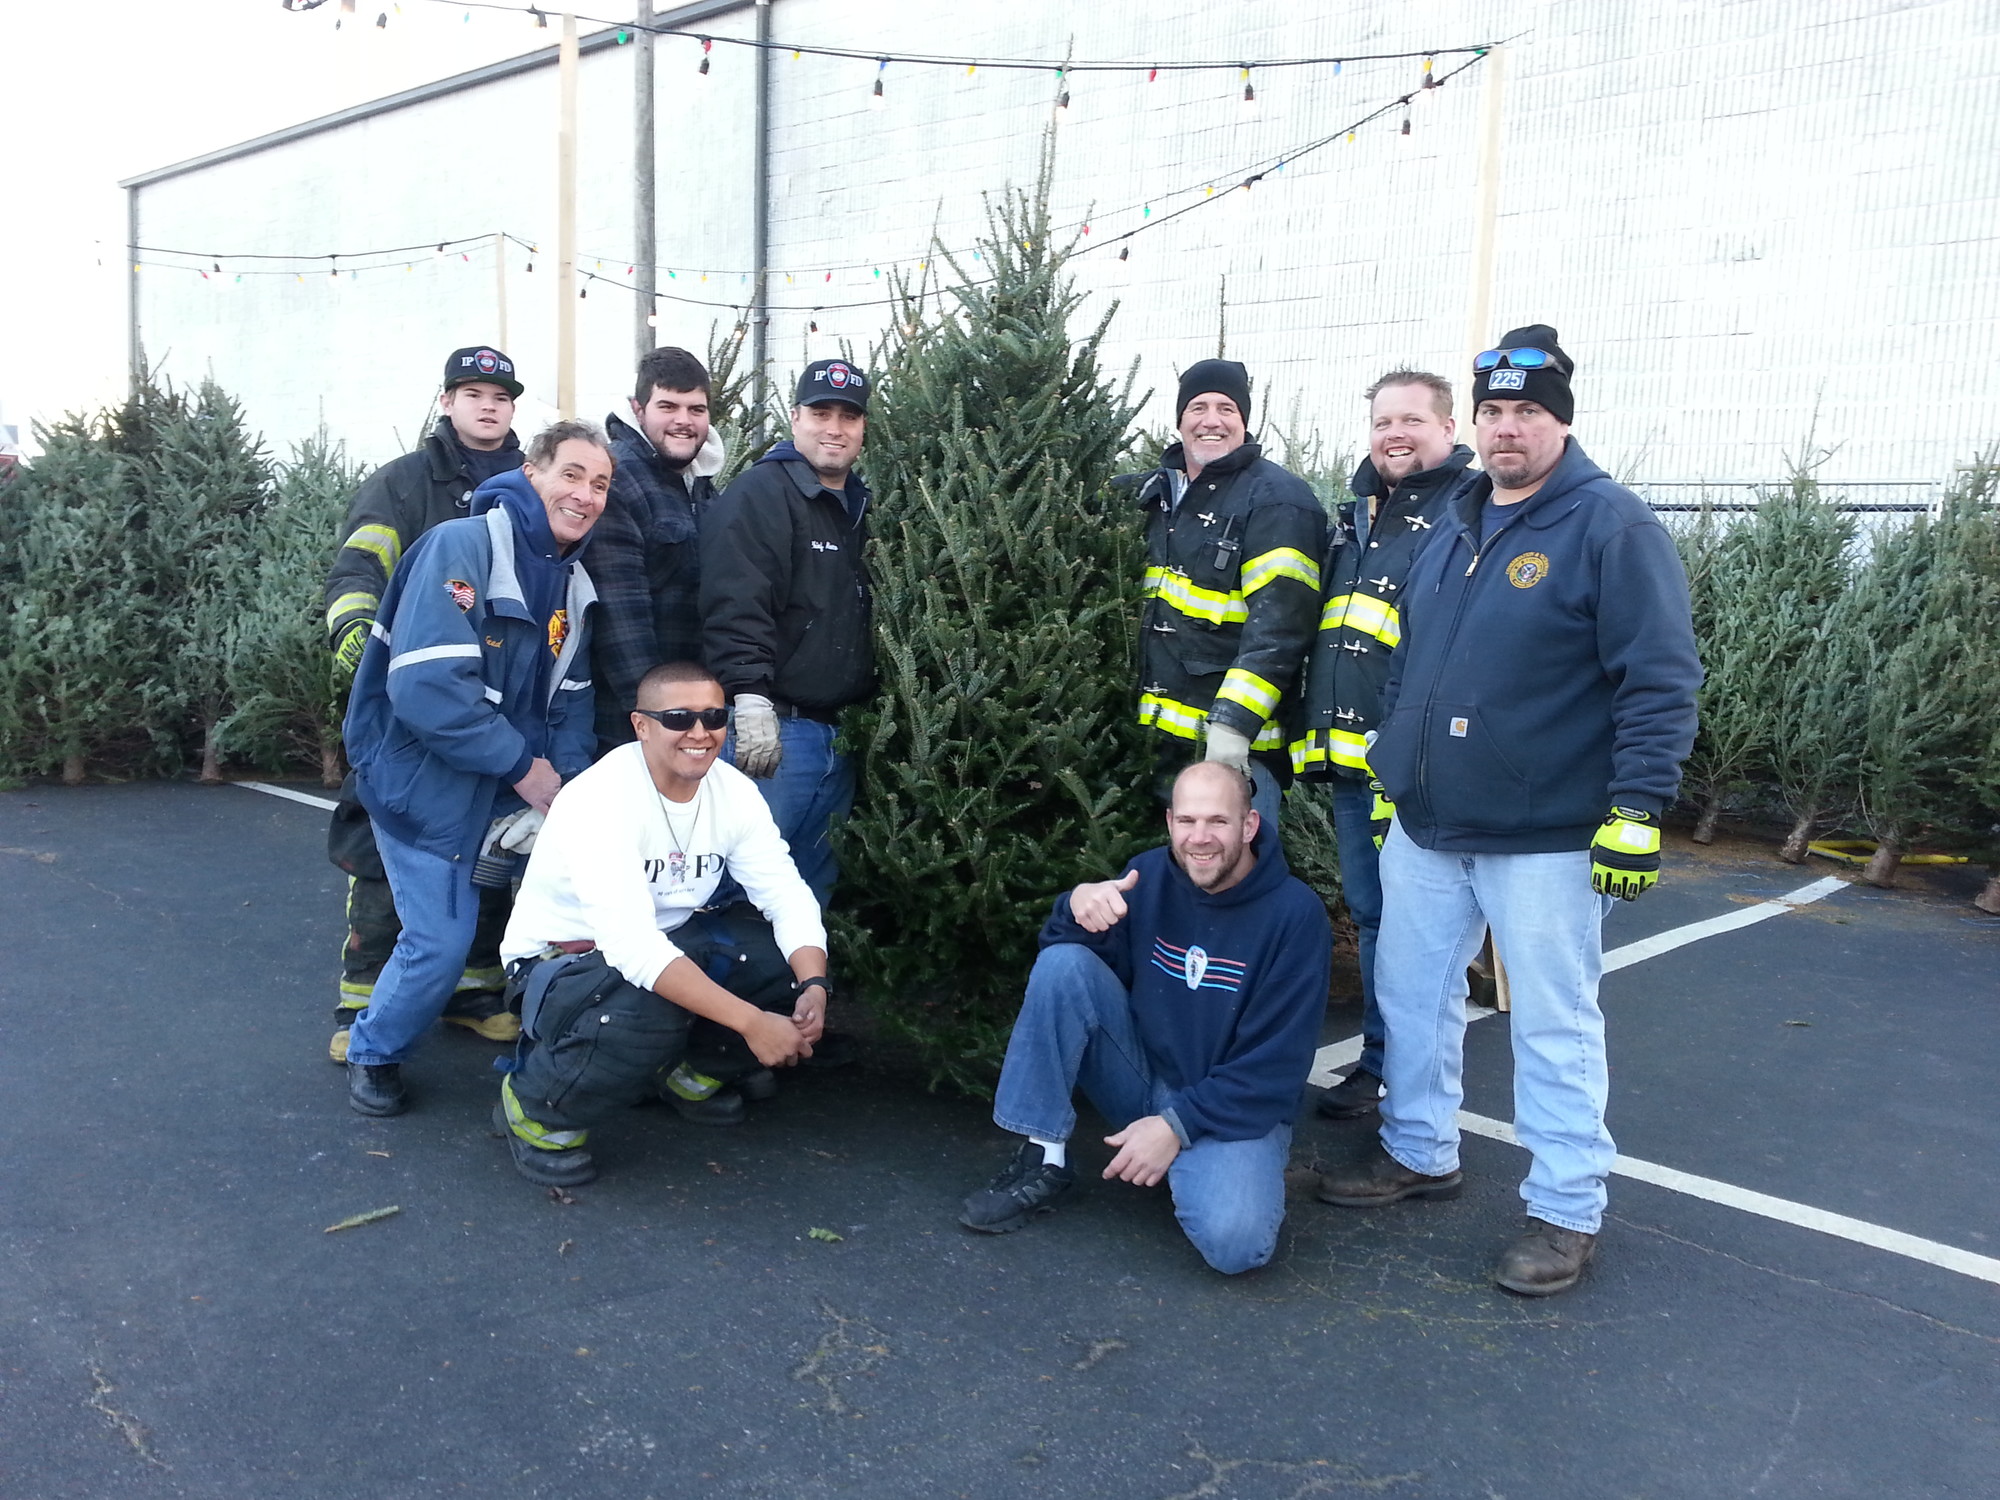 Island Park’s Bravest at the tree lot.